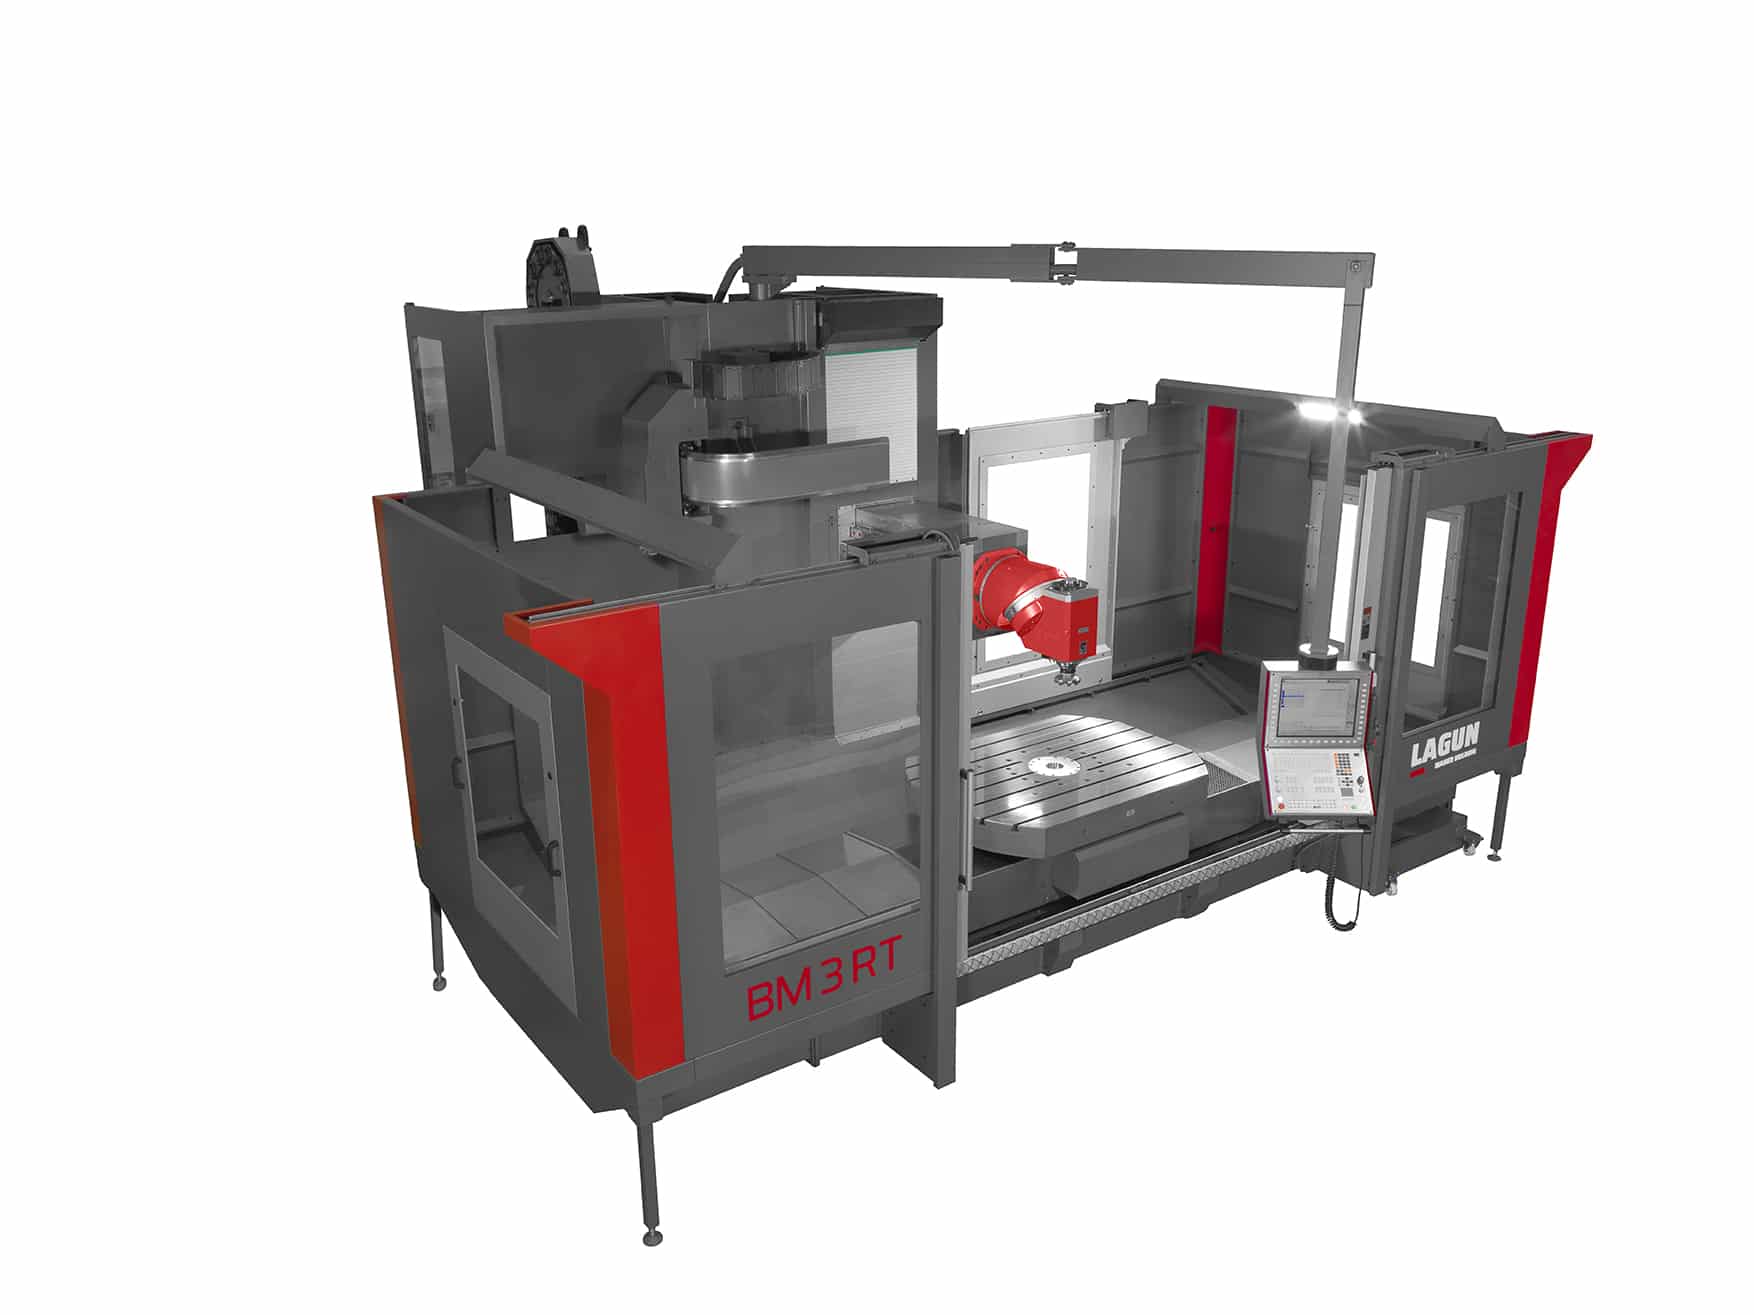 Lagun Model BM-RT Milling Machining Center with a fixed column and a rotary table